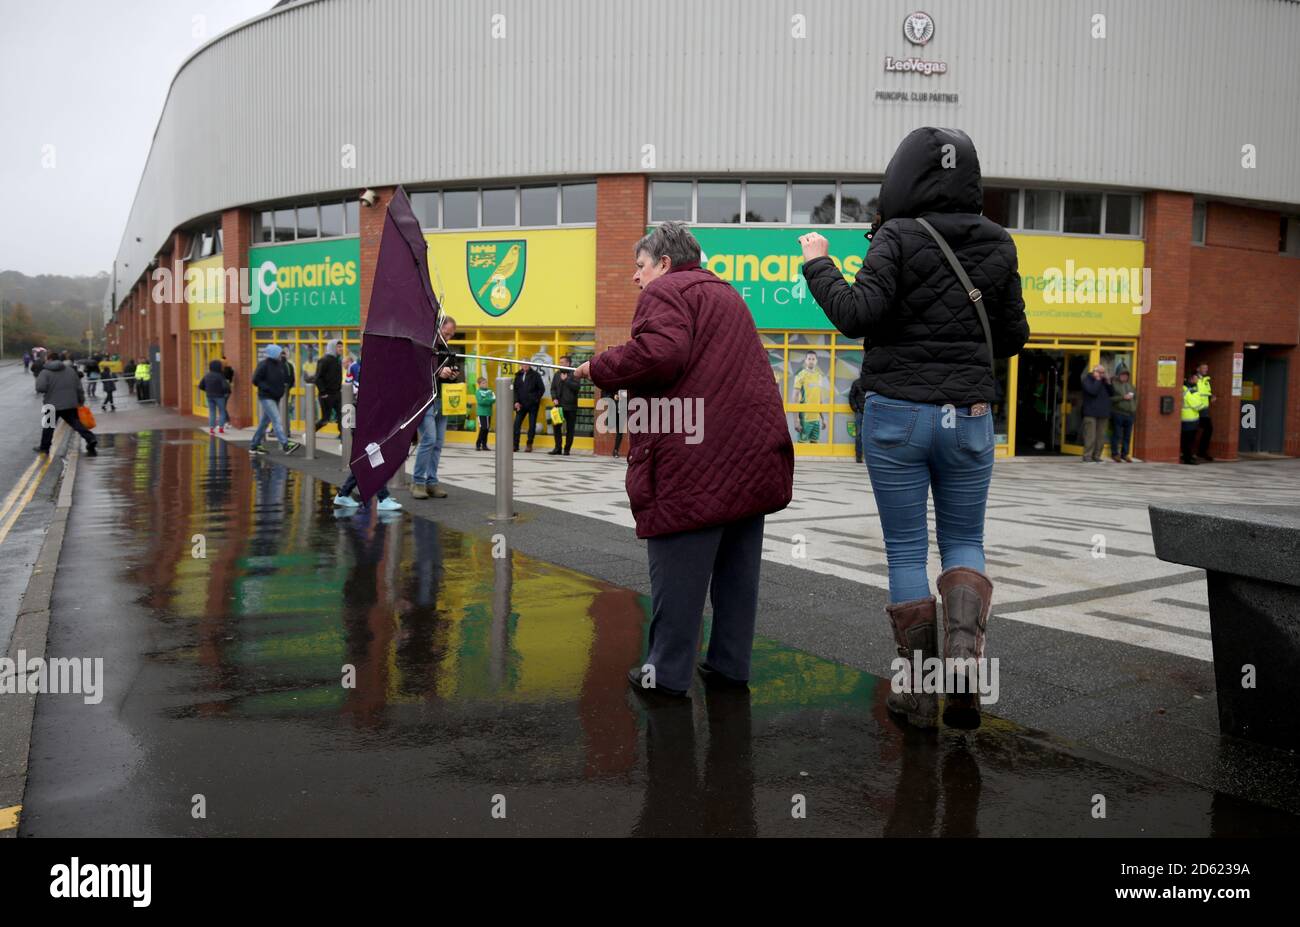 Fans make their way to Carrow Road stadium ahead of the match Stock Photo